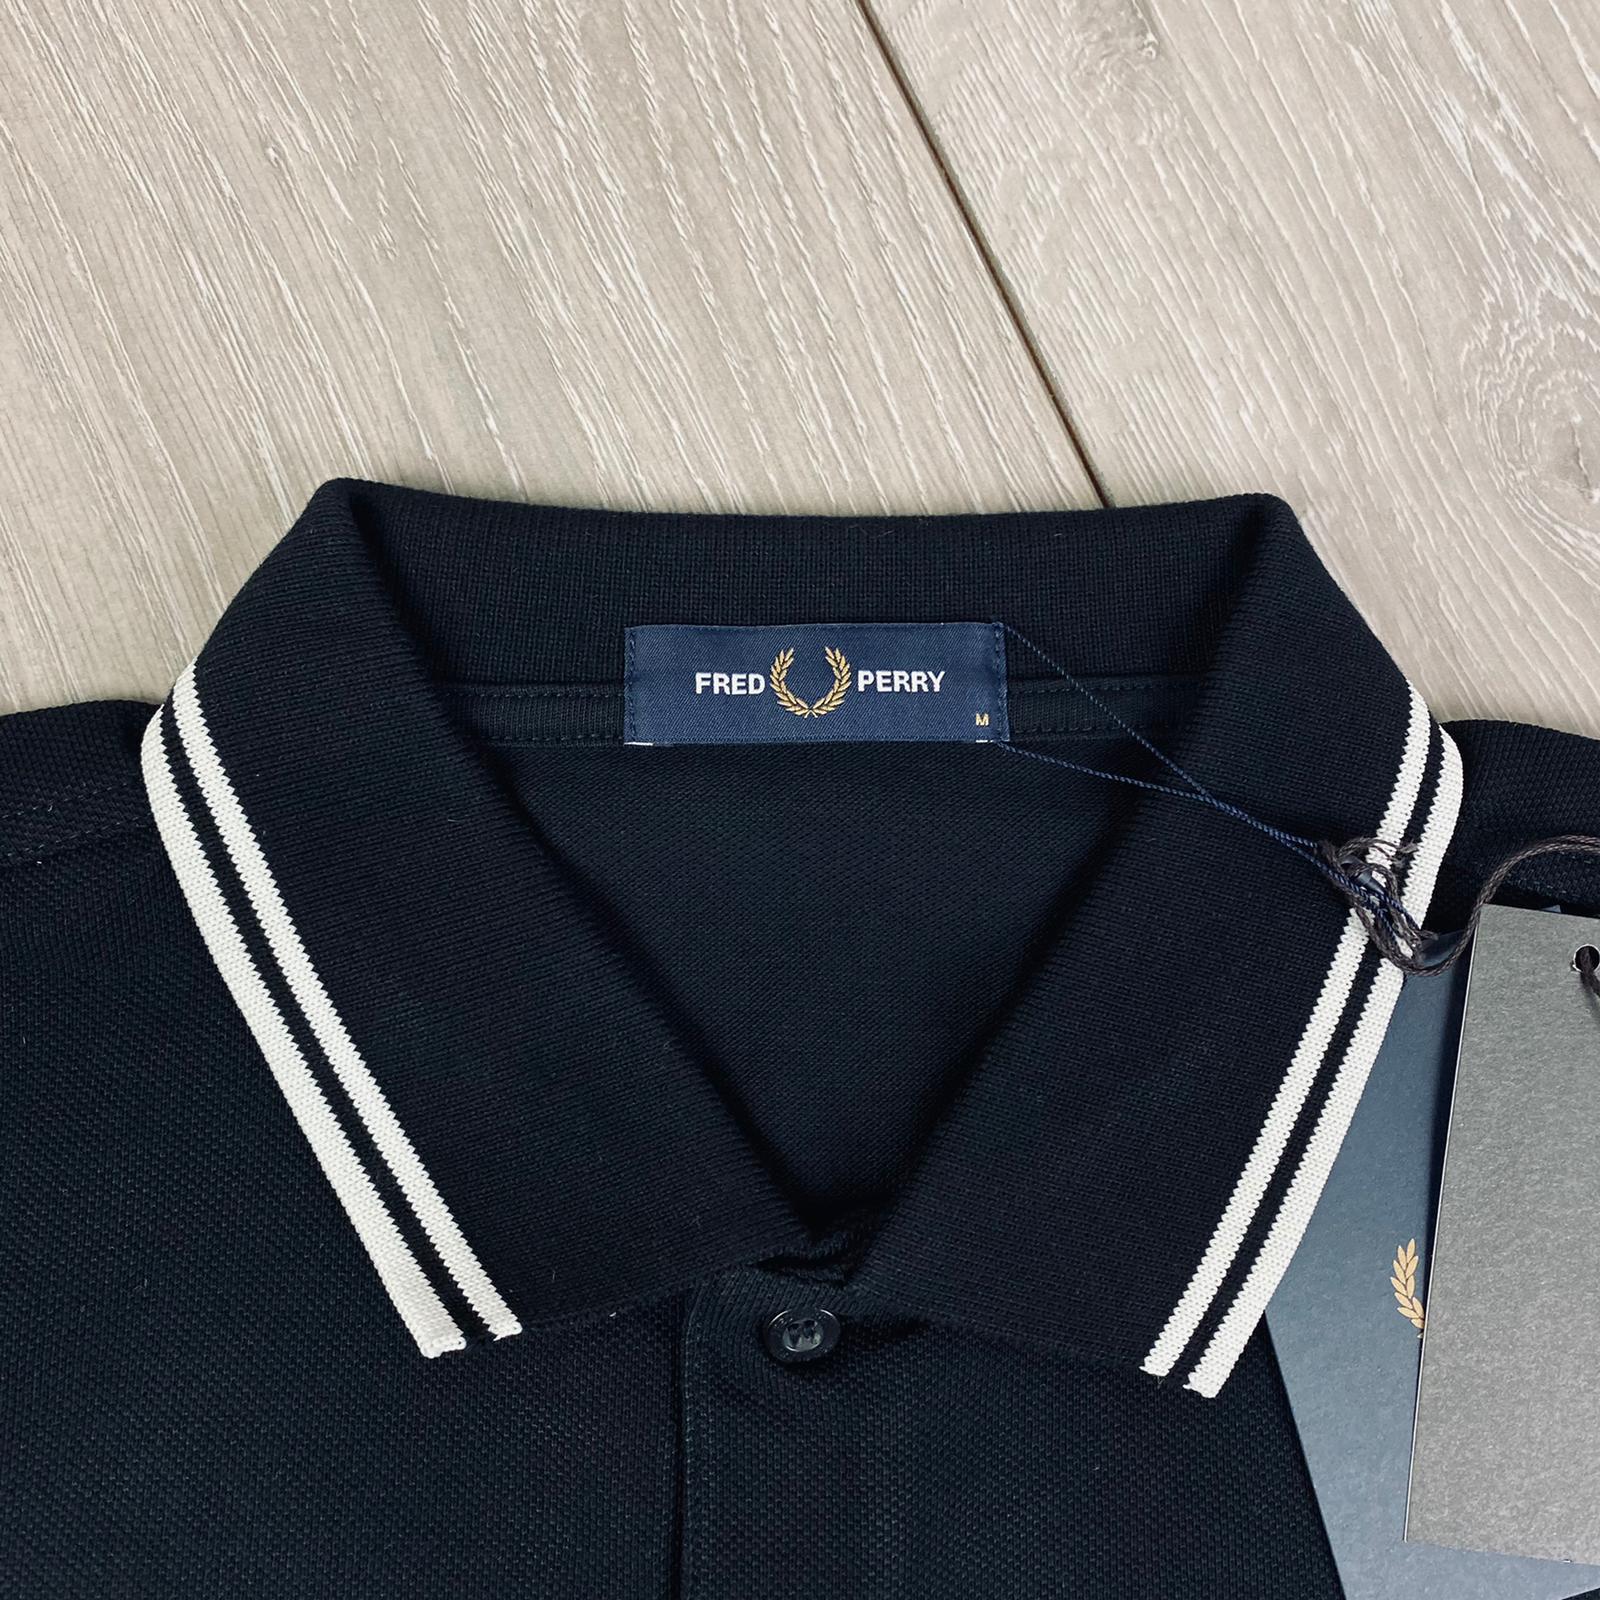 Fred Perry Wreath Polo Shirt